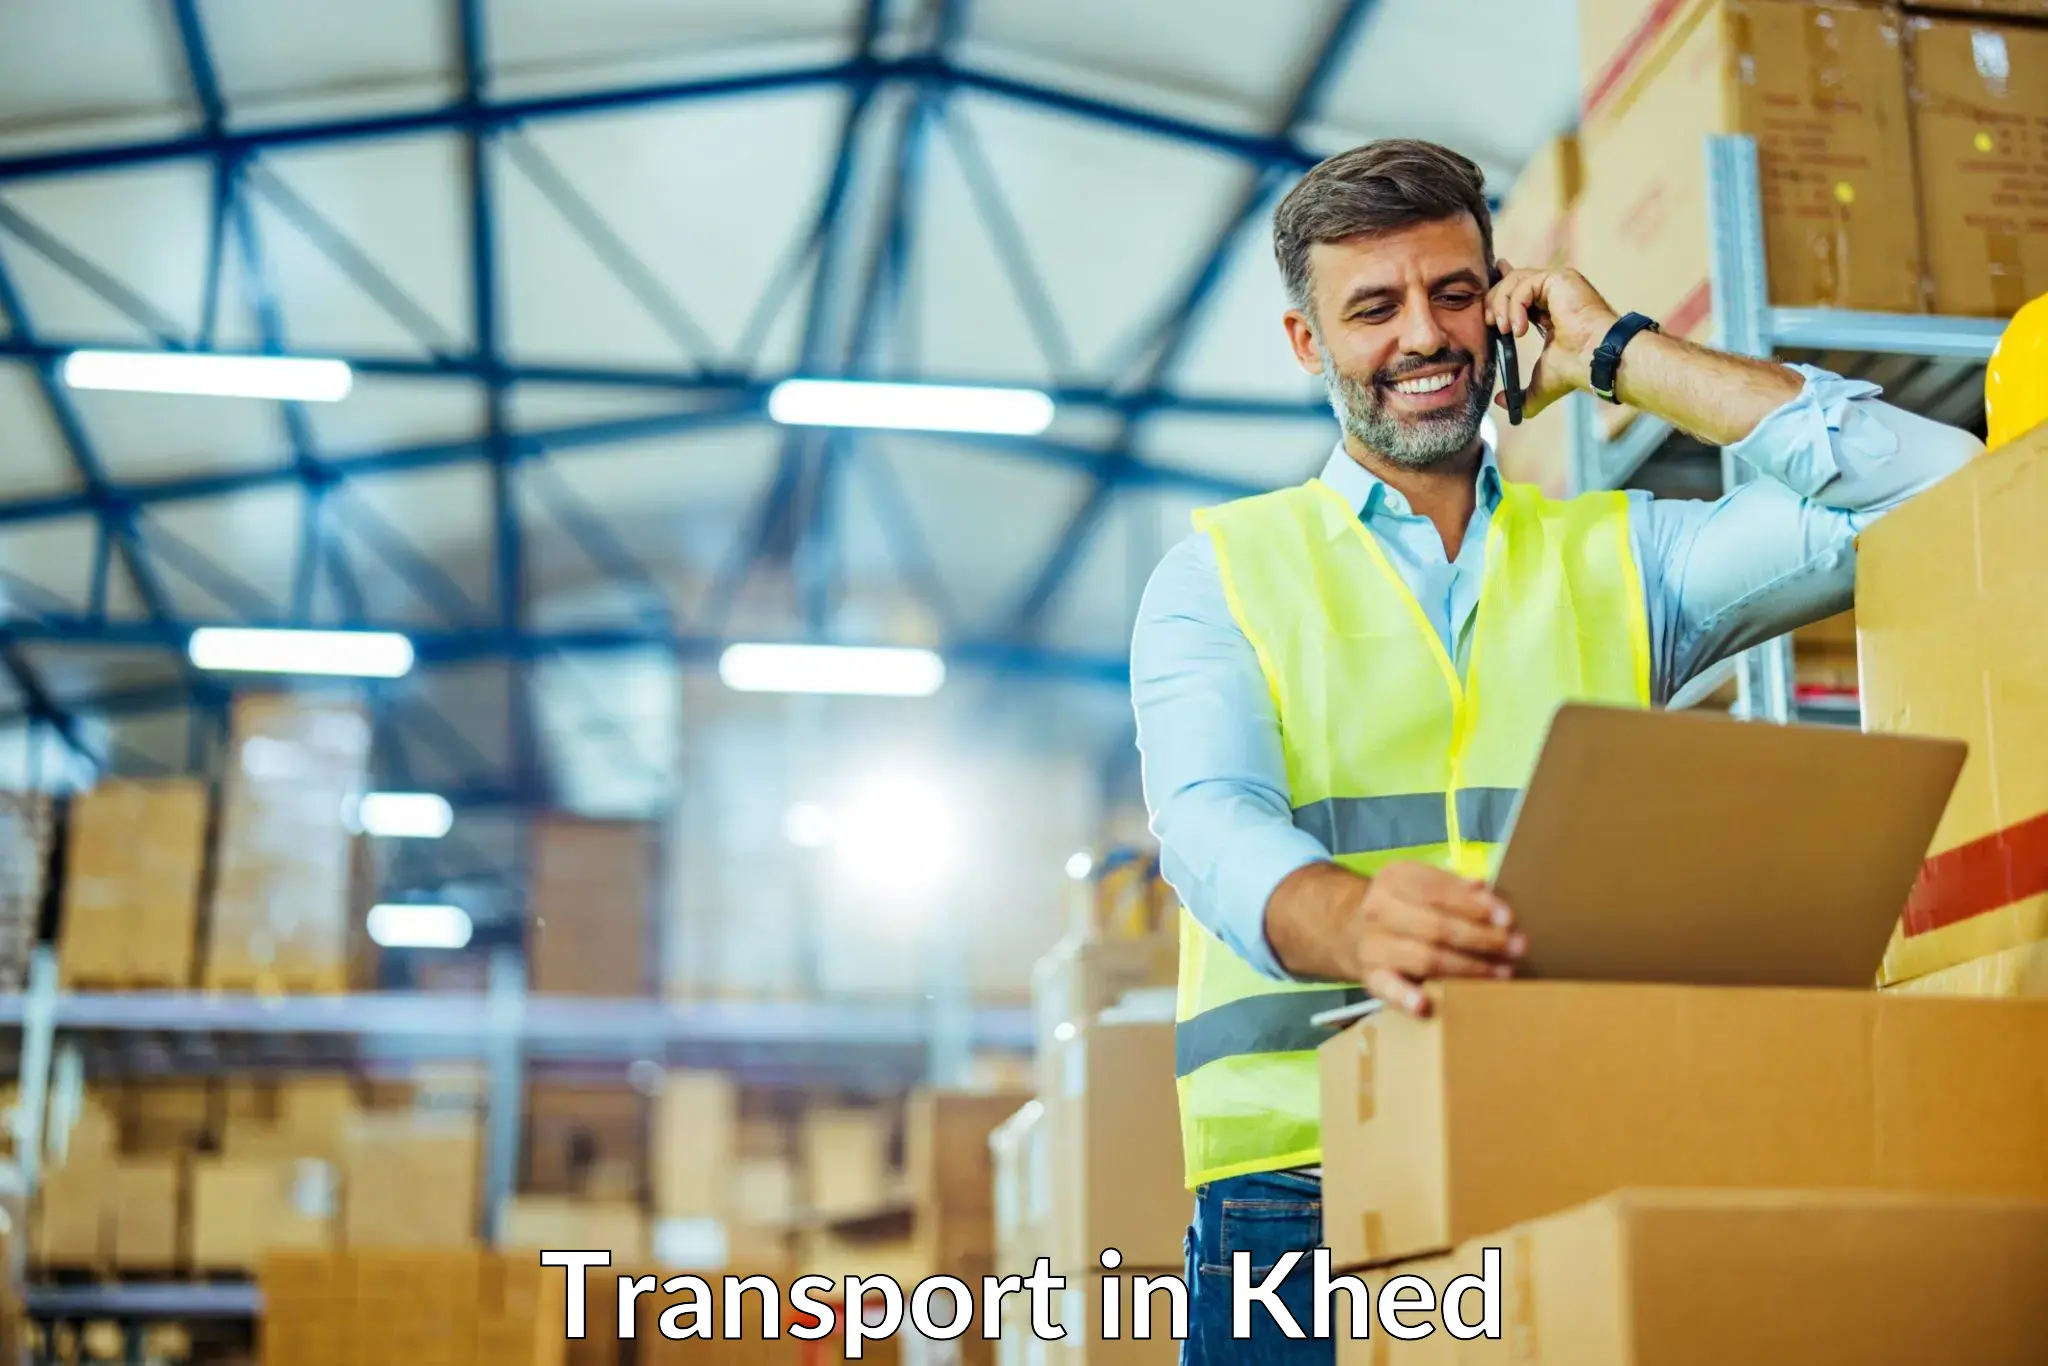 Transport shared services in Khed